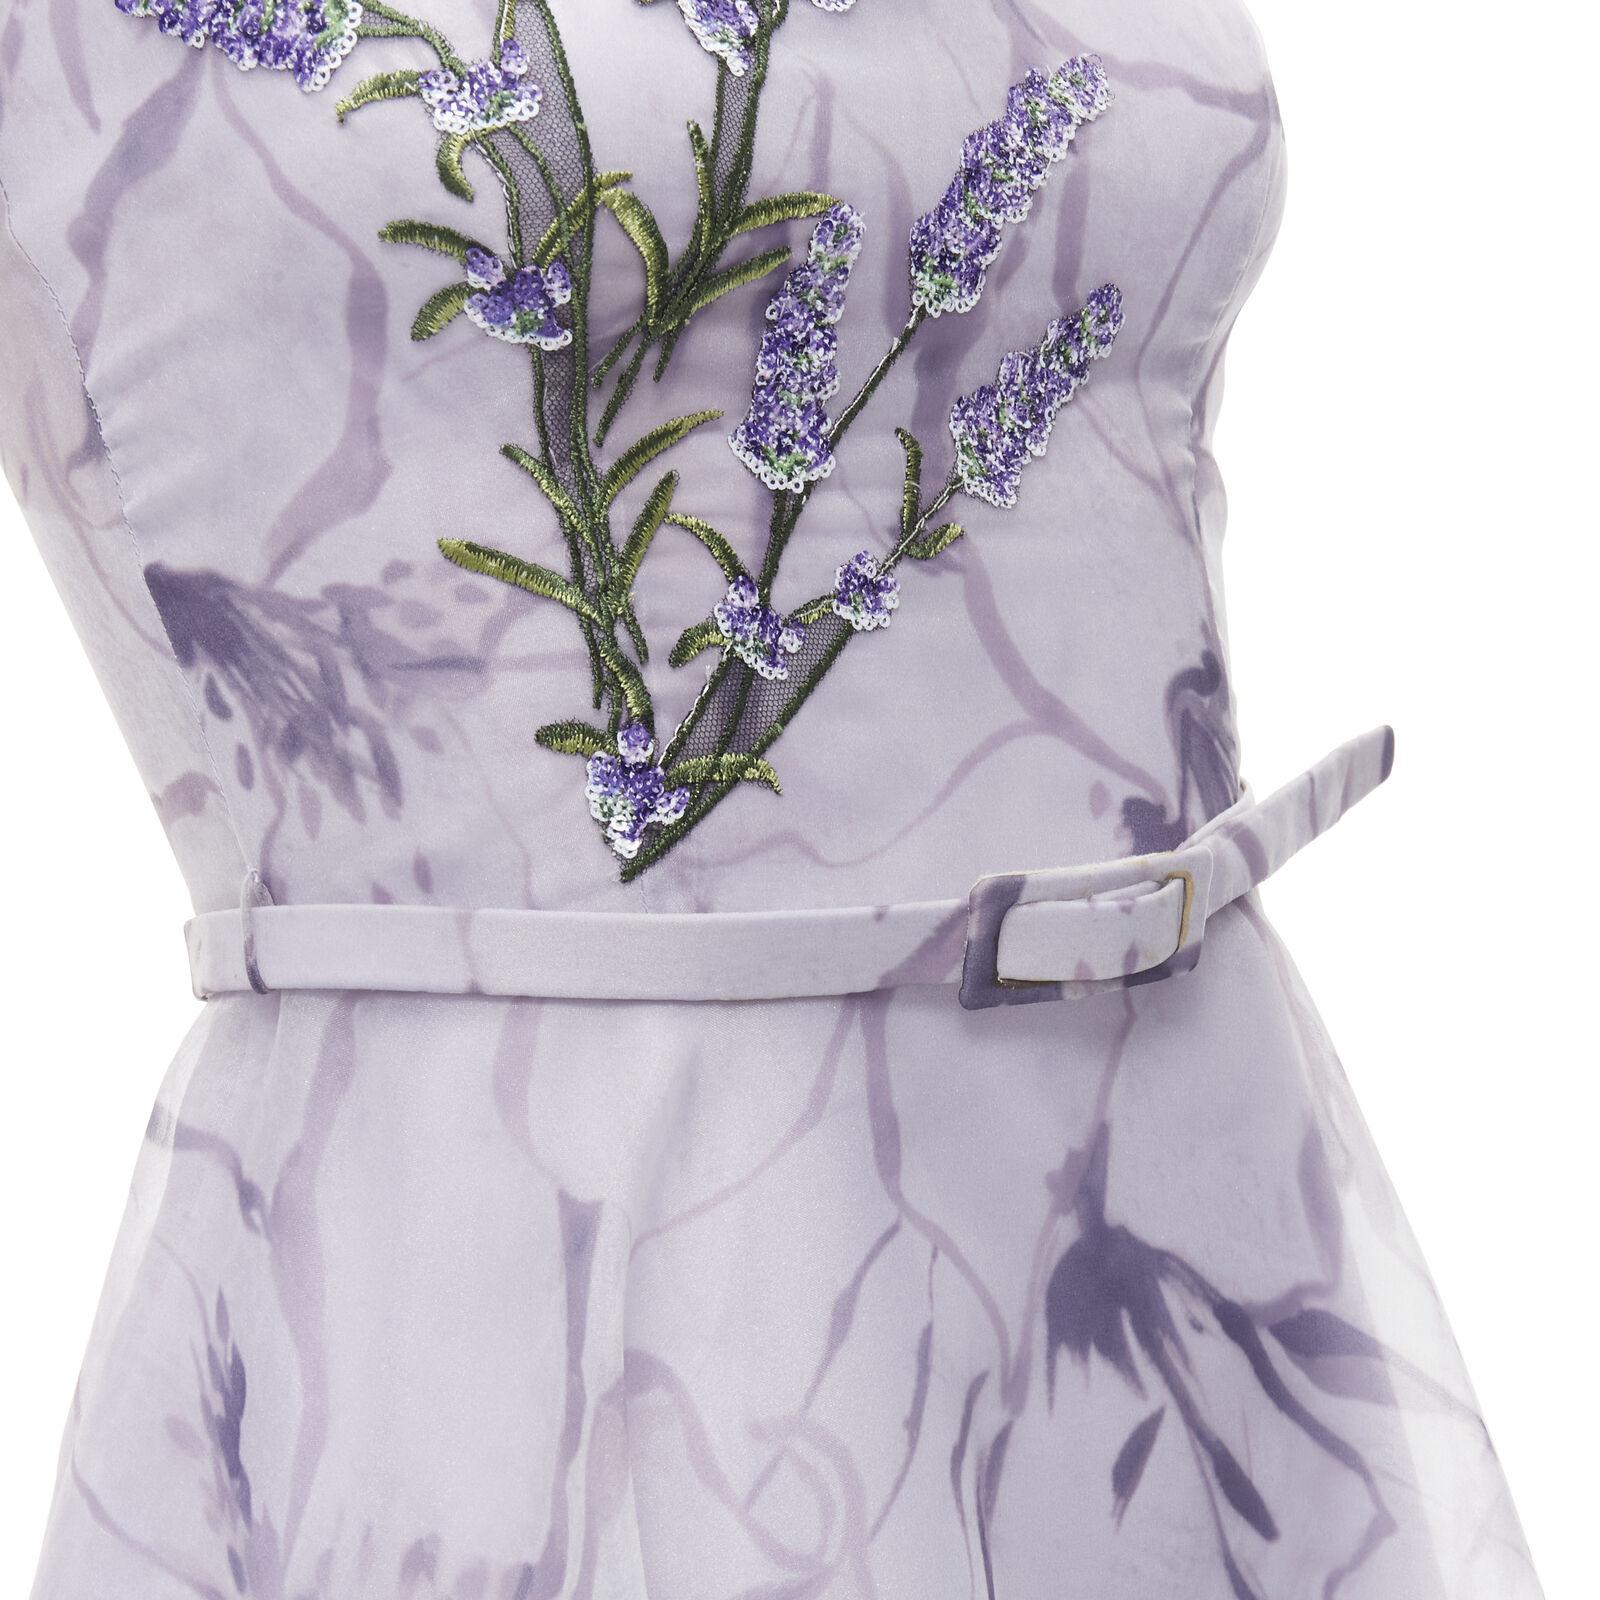 COSTARELLOS lilac purple lavender embroidery belted midi dress FR34 XS
Reference: AAWC/A00058
Brand: Costerellos
Color: Purple
Pattern: Floral
Closure: Zip
Lining: Fully Lined
Extra Details: Lavender sequins embroidery. Detachable belt at waist.